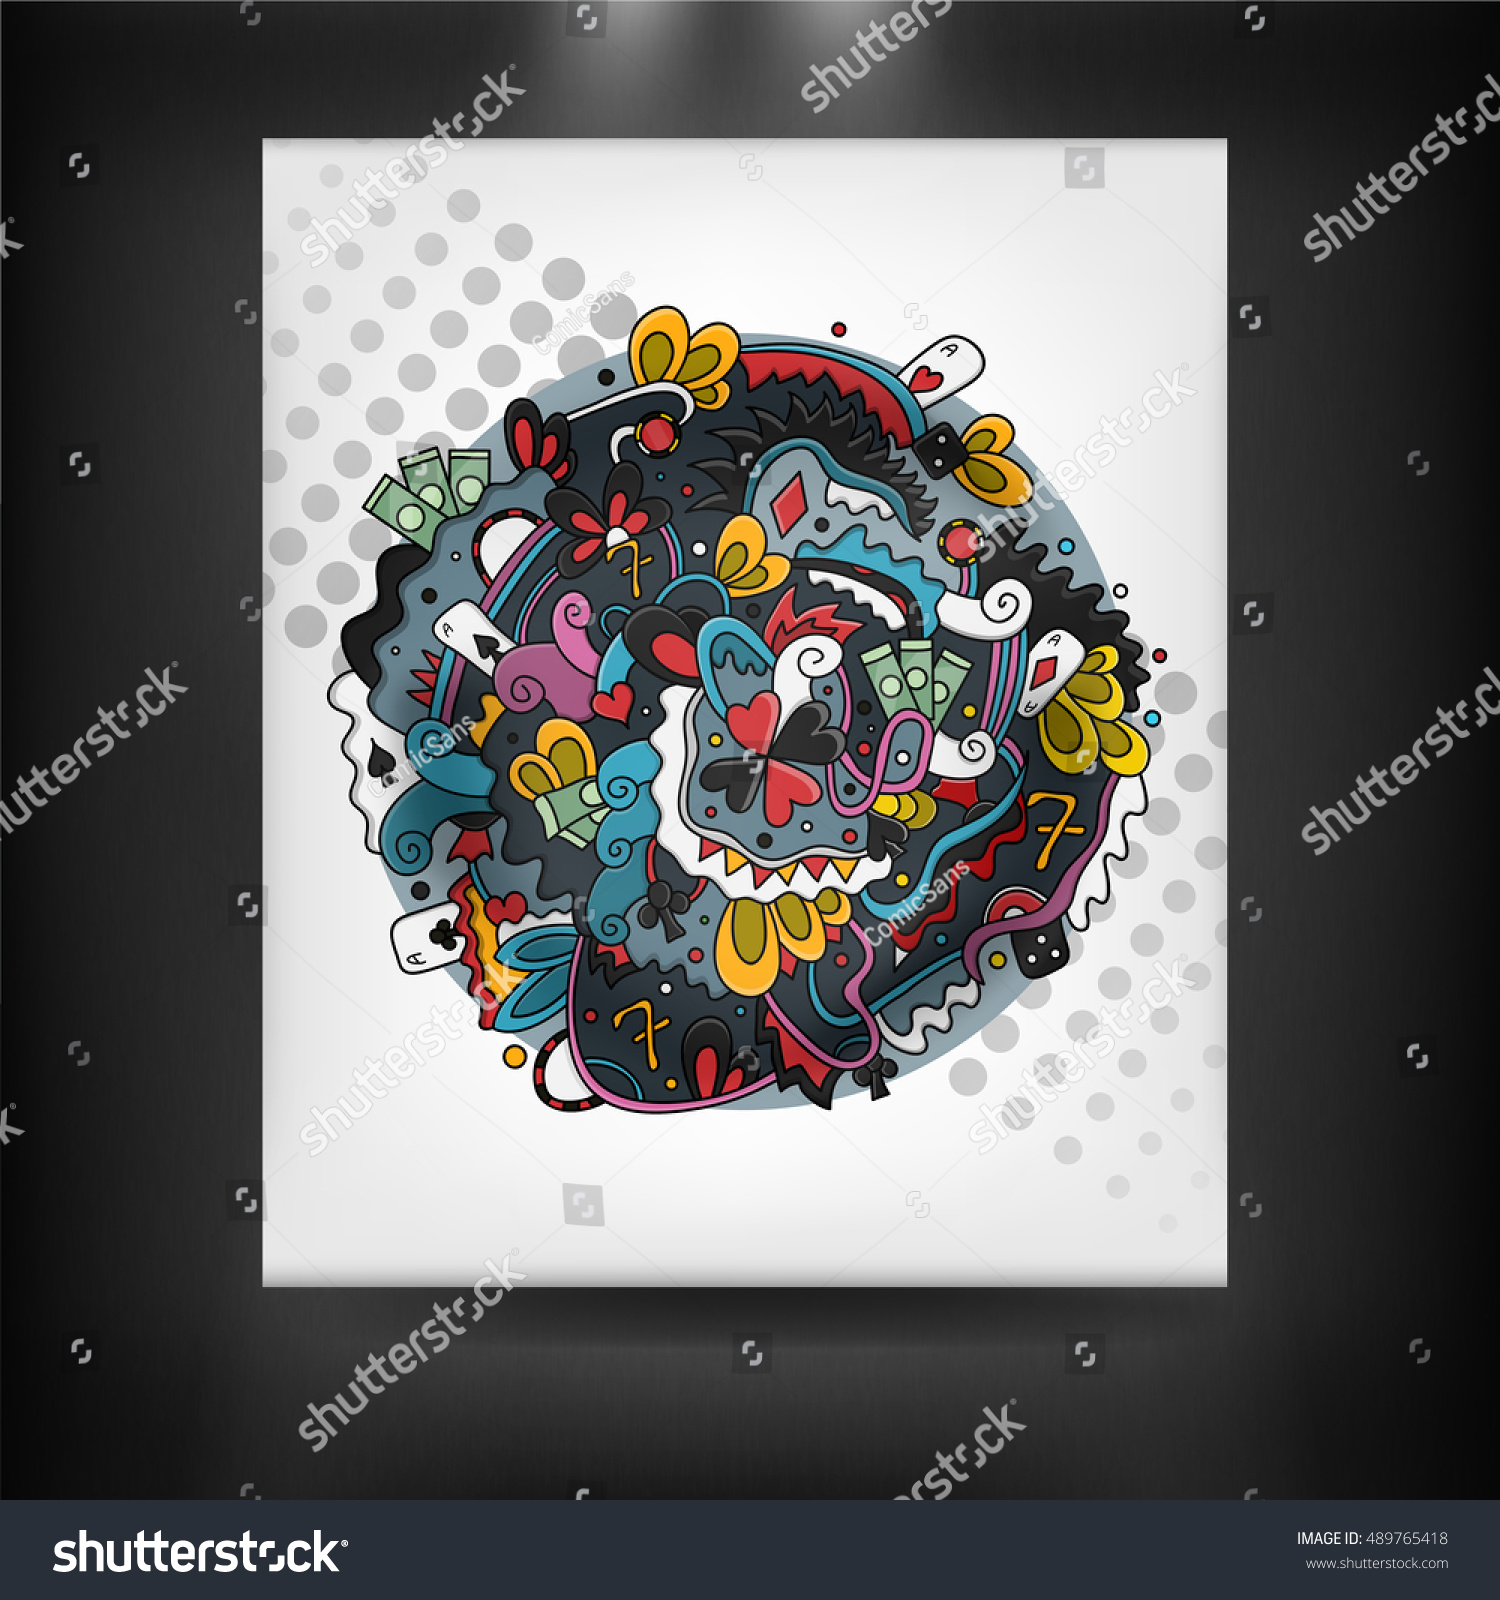 Vector Hand Drawn Doodle Art Template Stock Vector Royalty Free